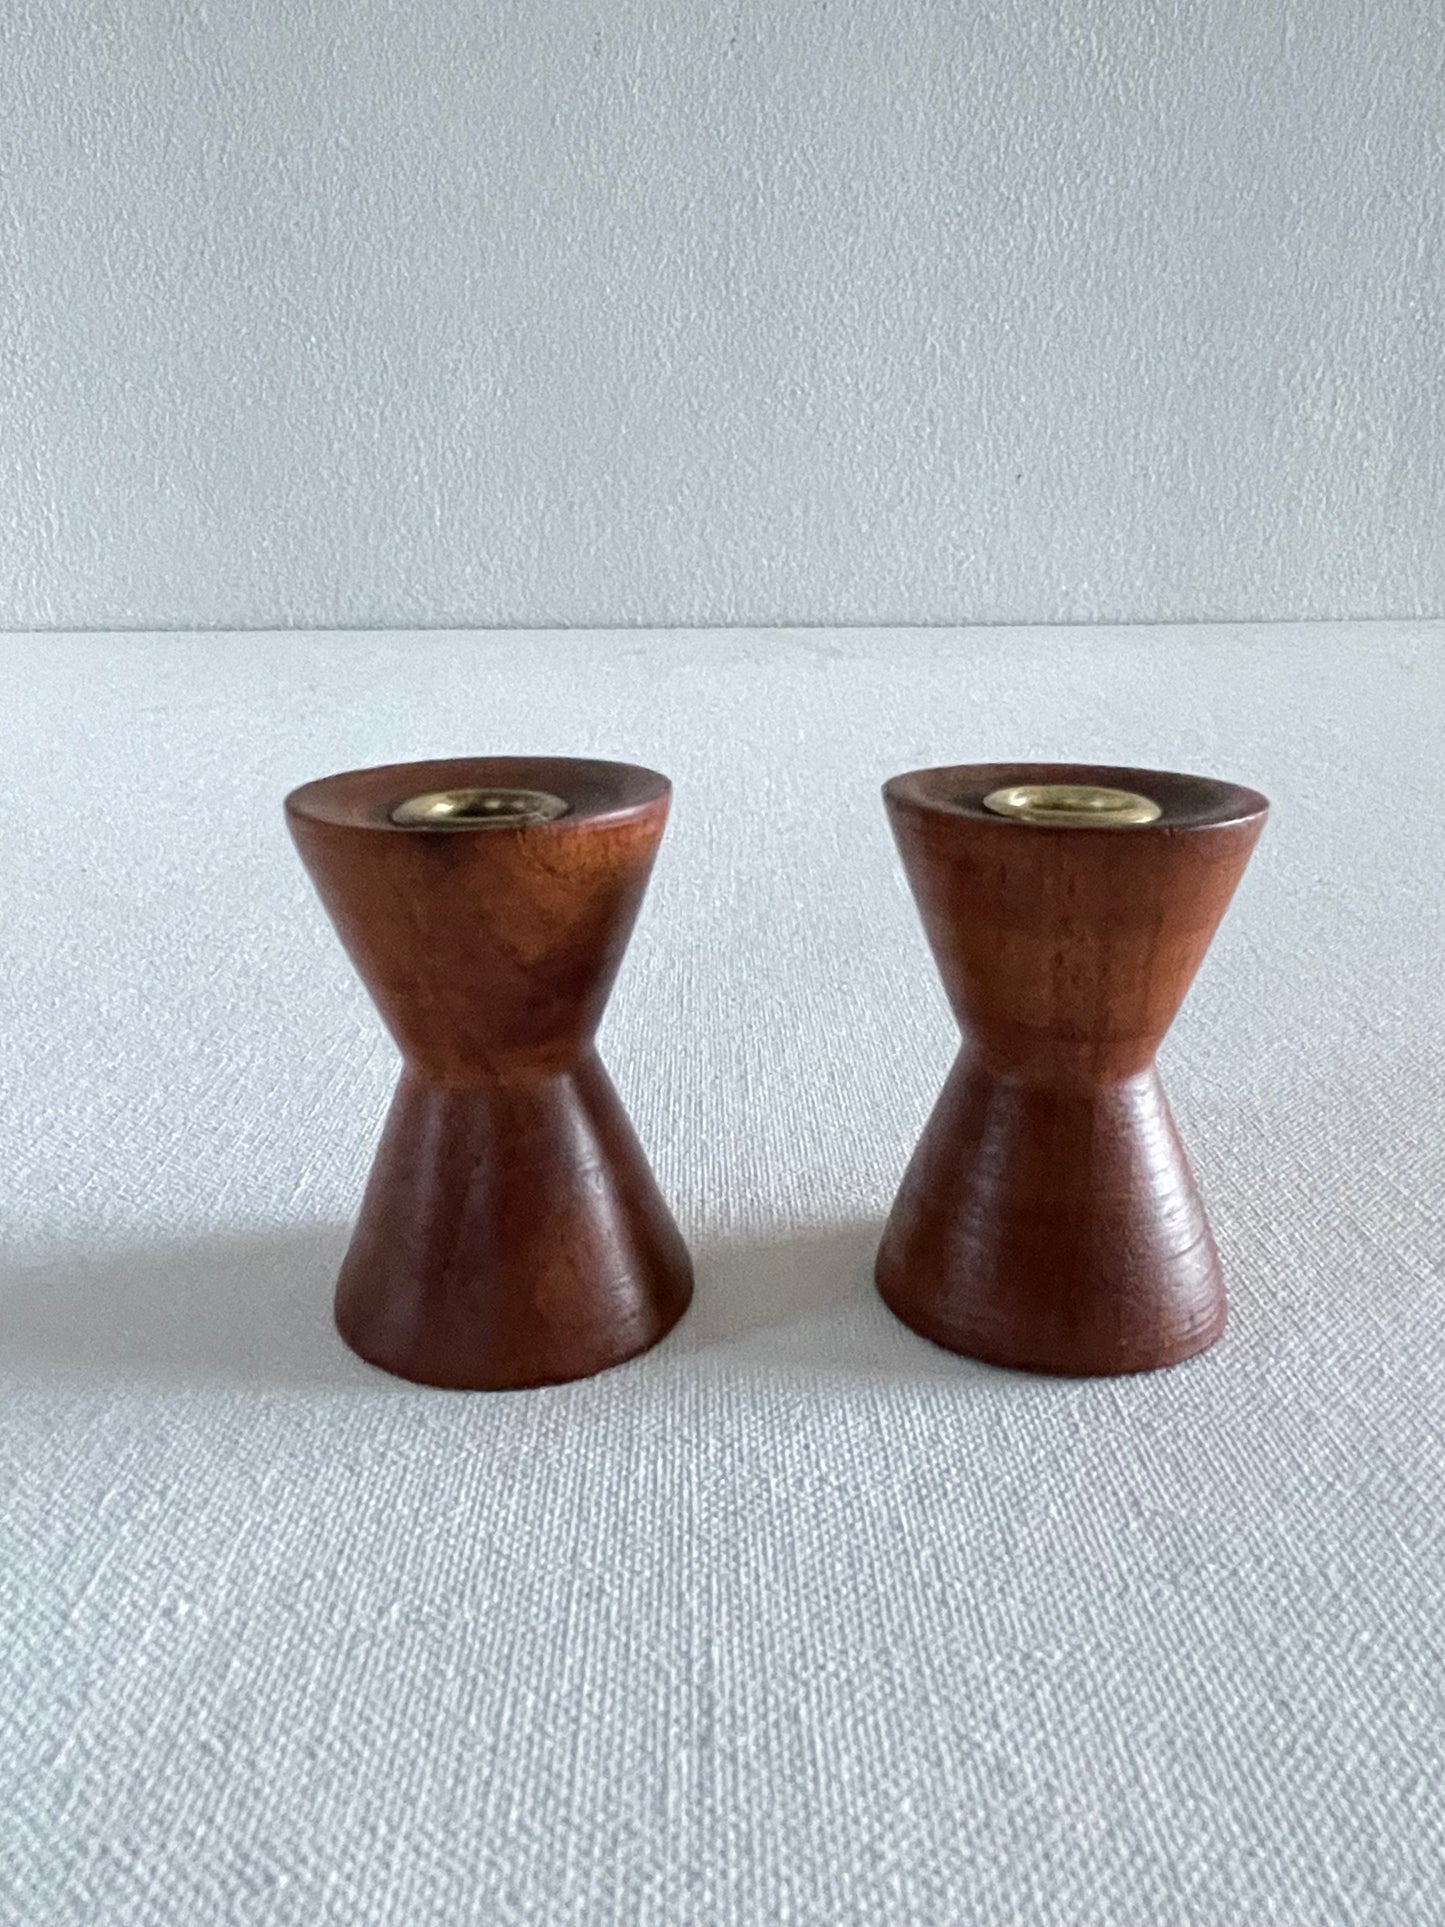 1960s Mid Century Danish Modern Teak Candle Holders Dual Size - a Pair